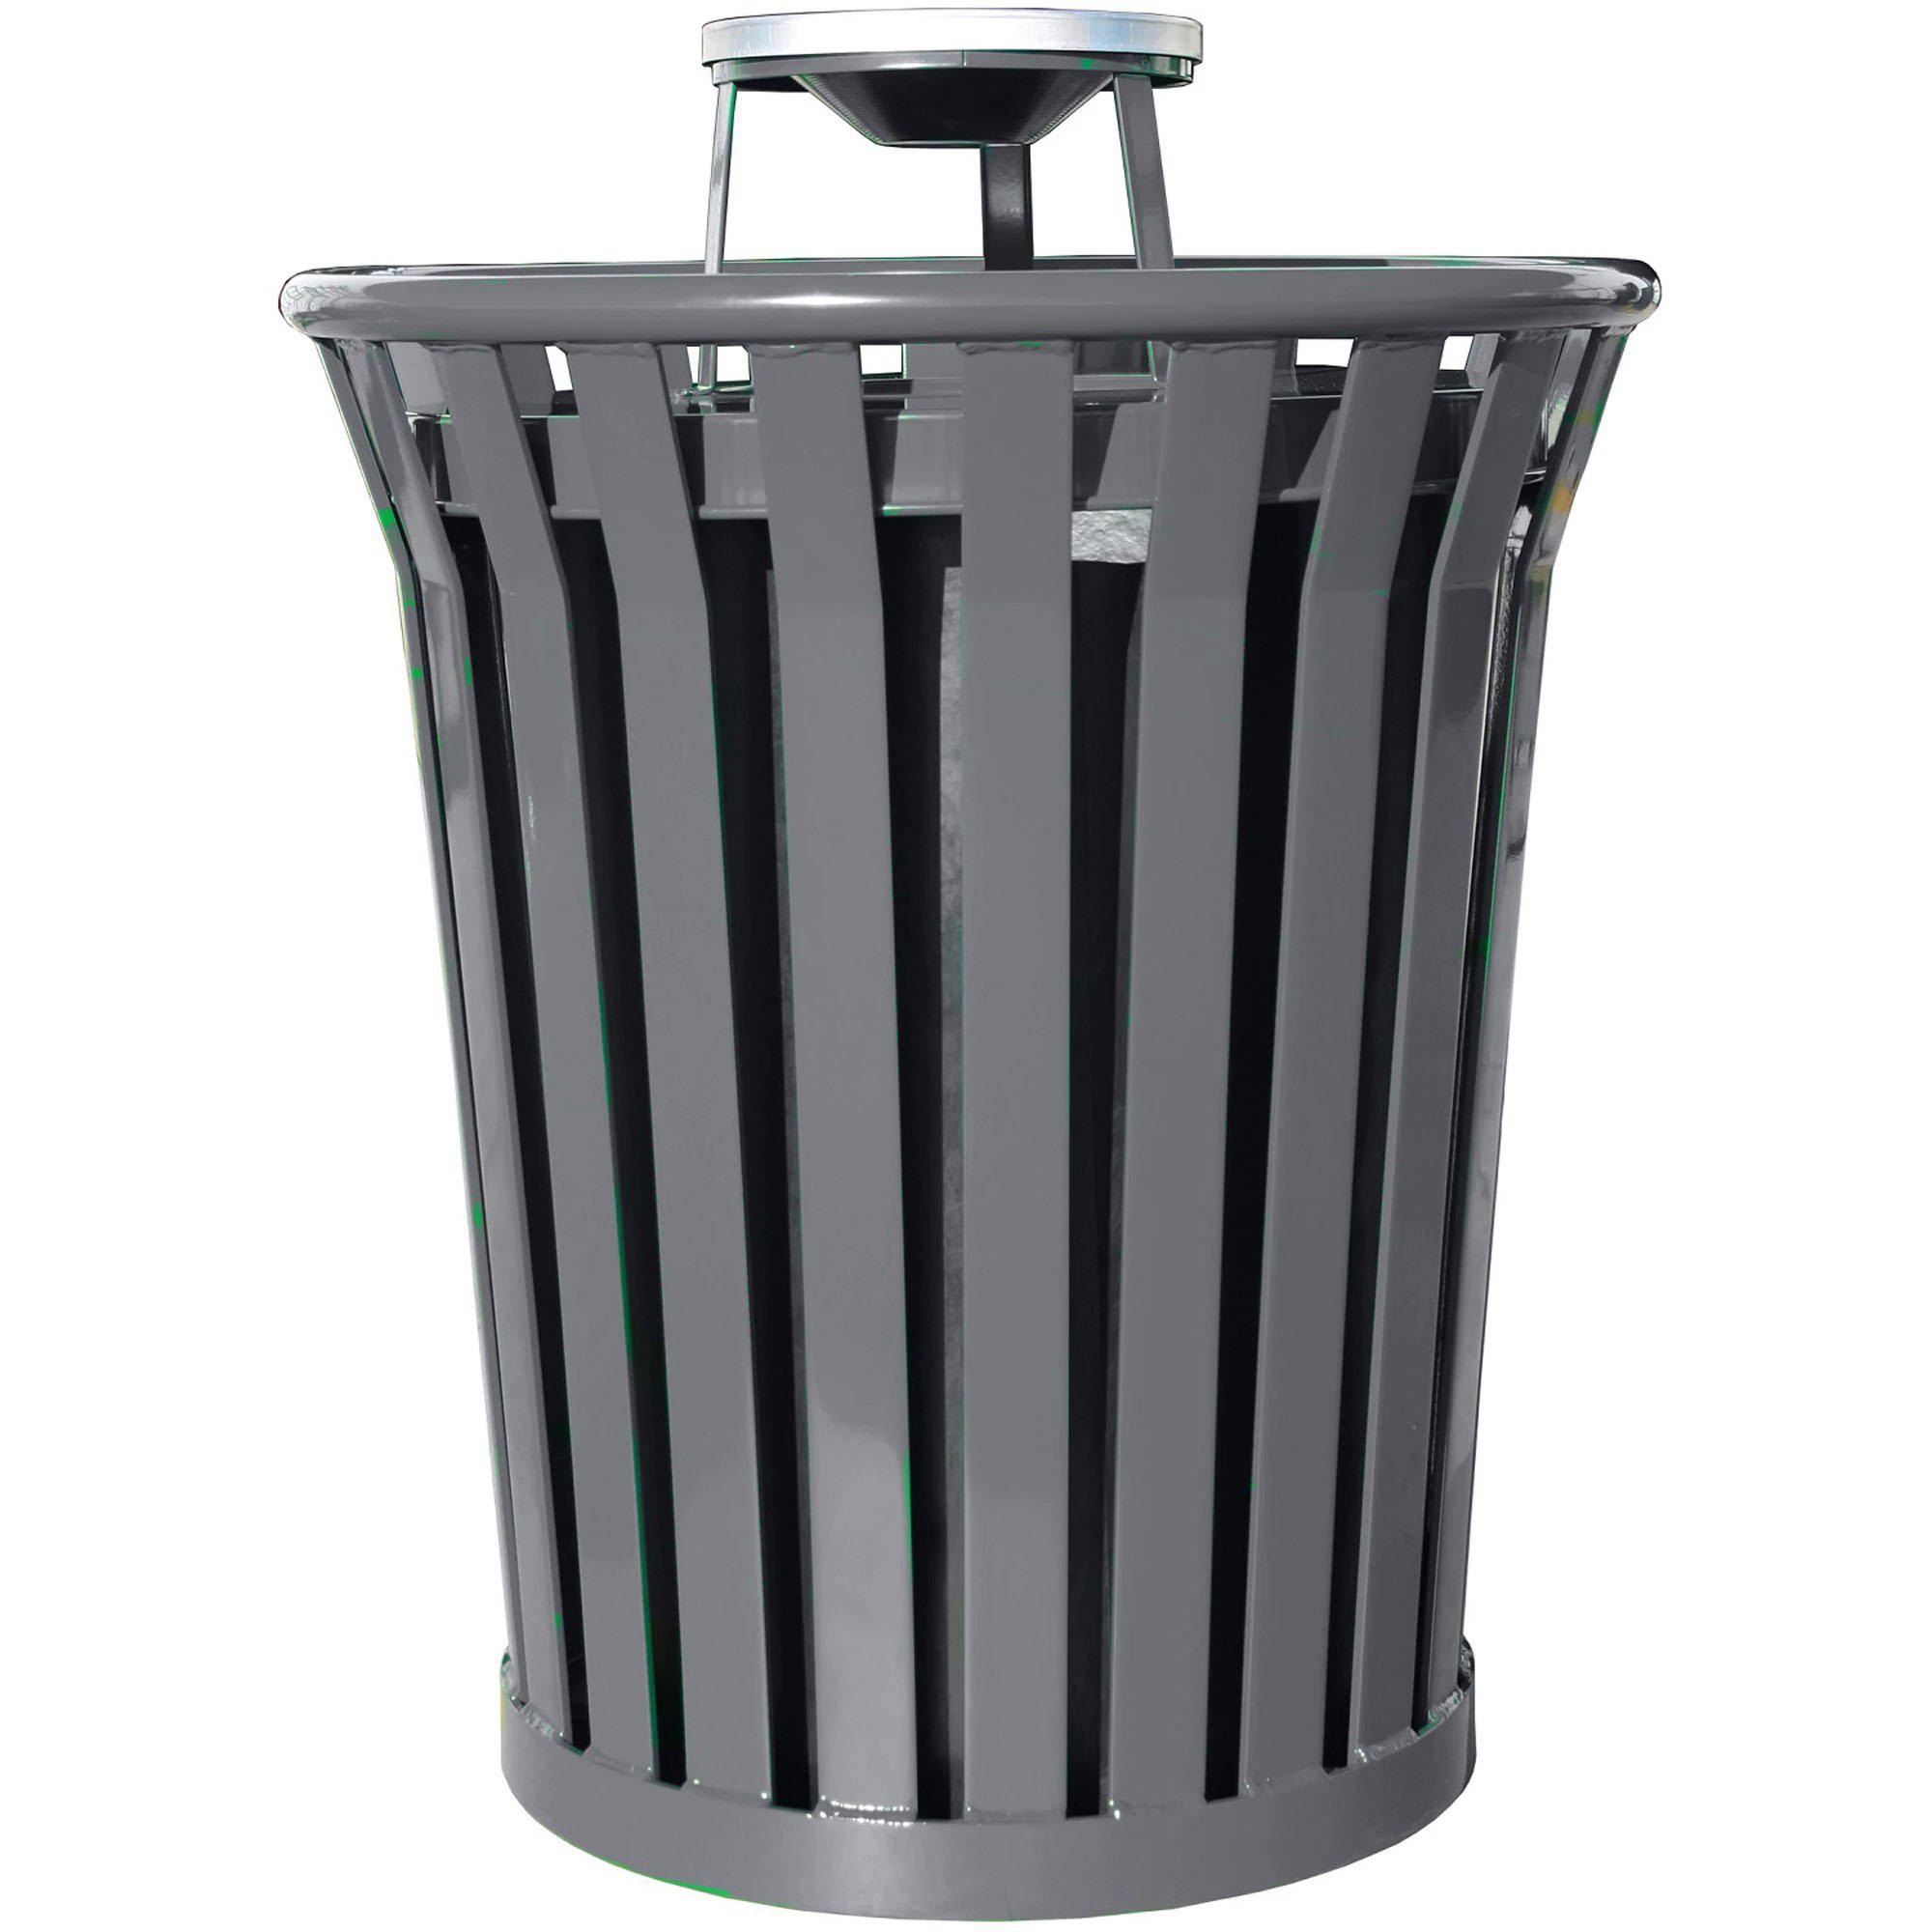 Wydman Collection, Outdoor Garbage Cans